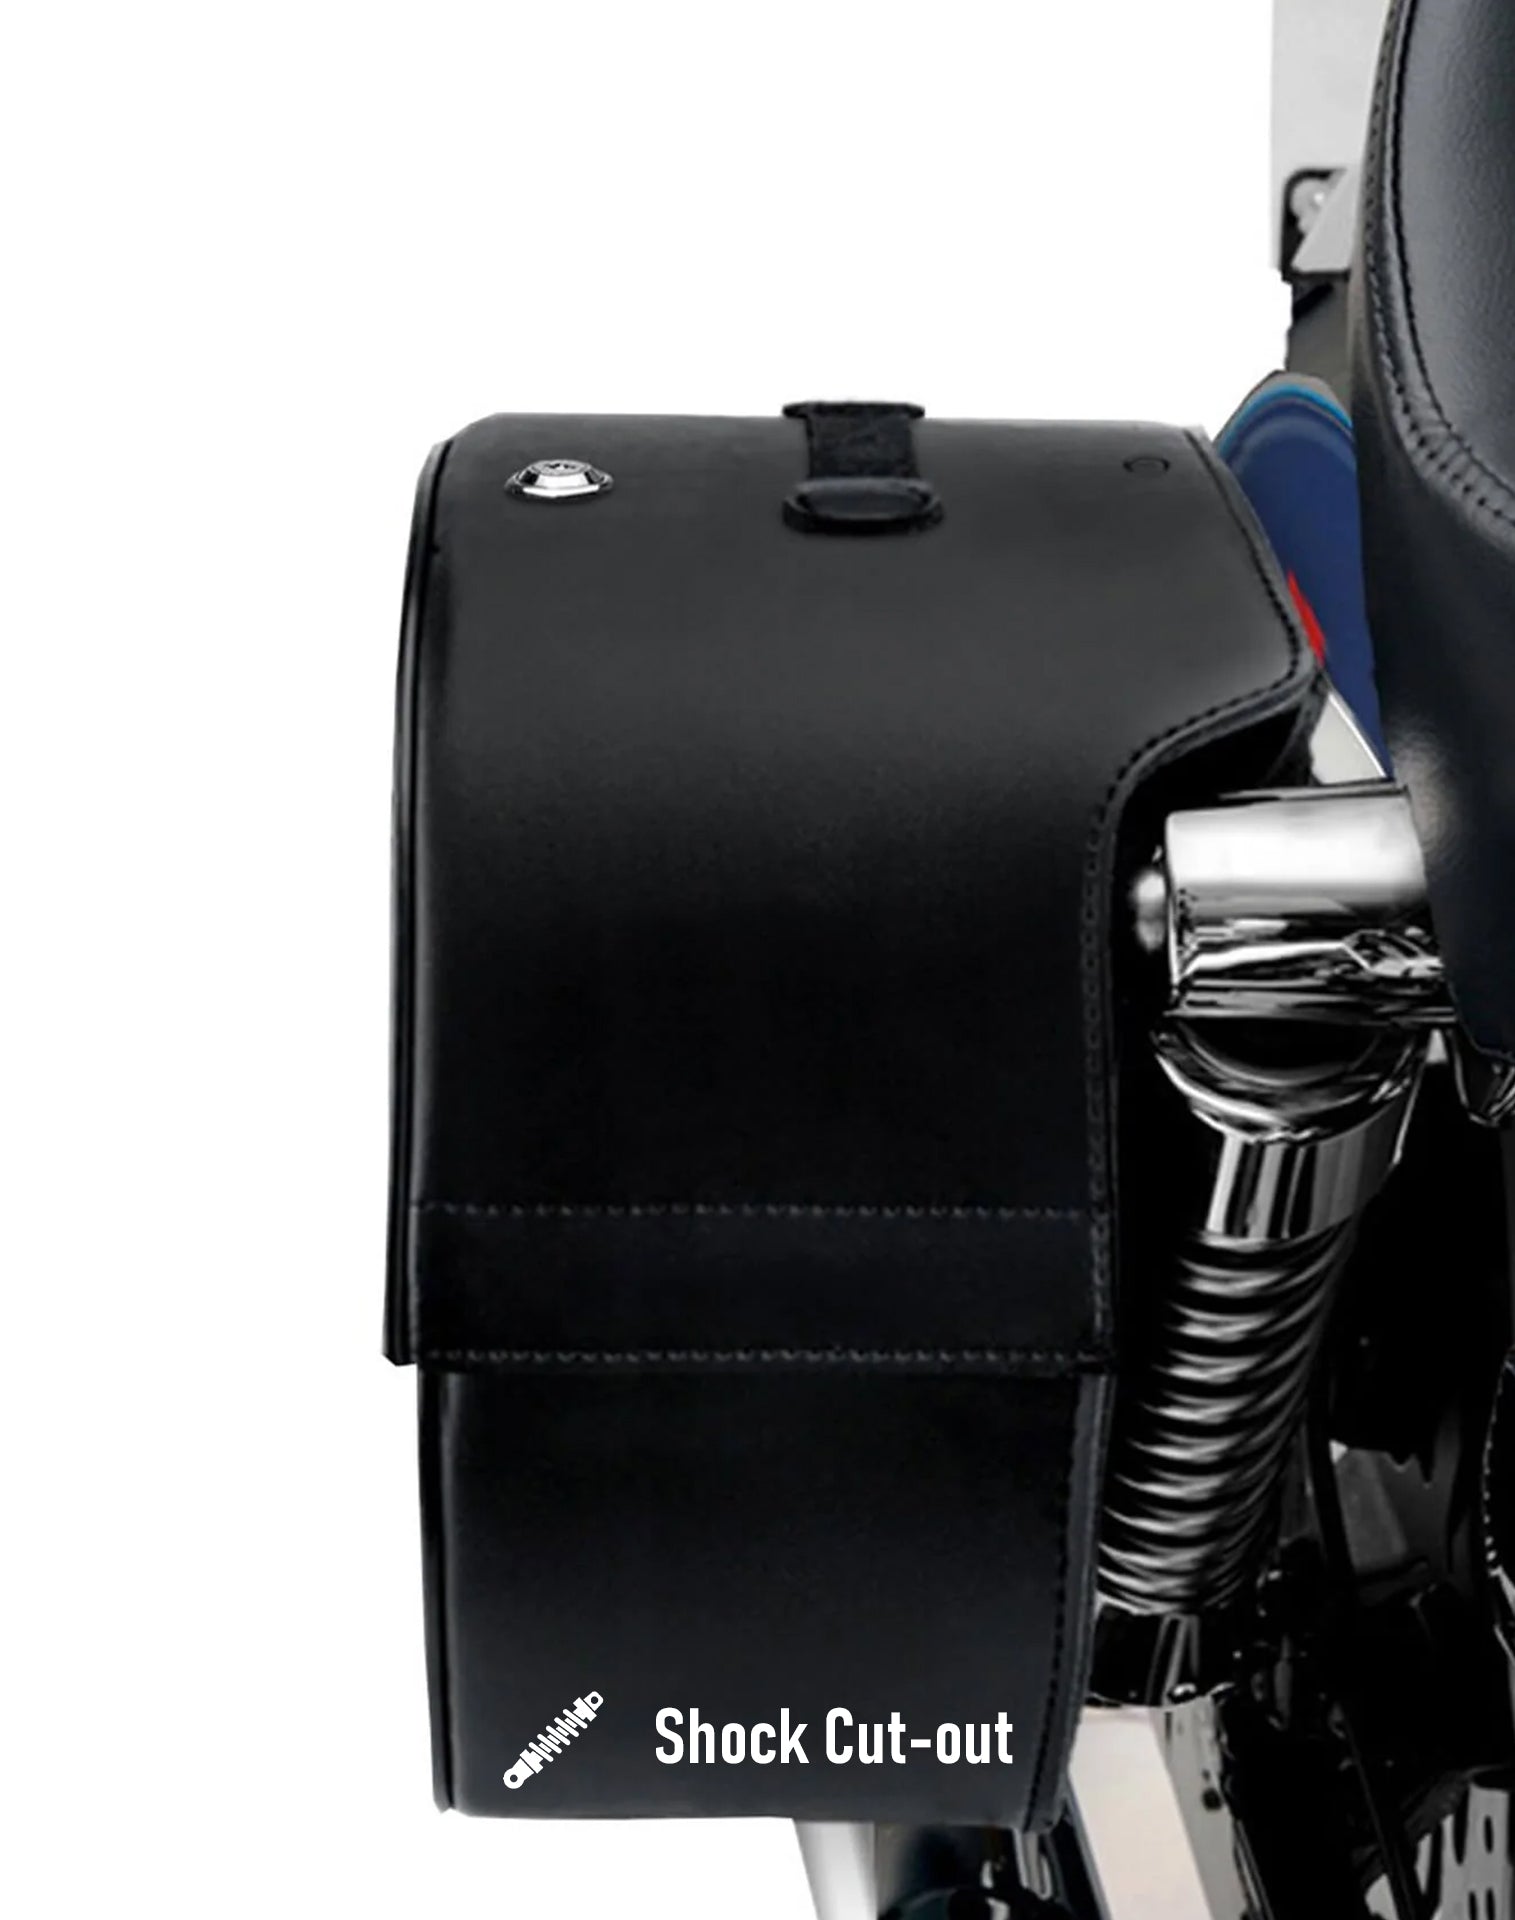 Viking Spear Shock Cut Out Large Leather Motorcycle Saddlebags For Harley Sportster 72 Xl1200V are Durable